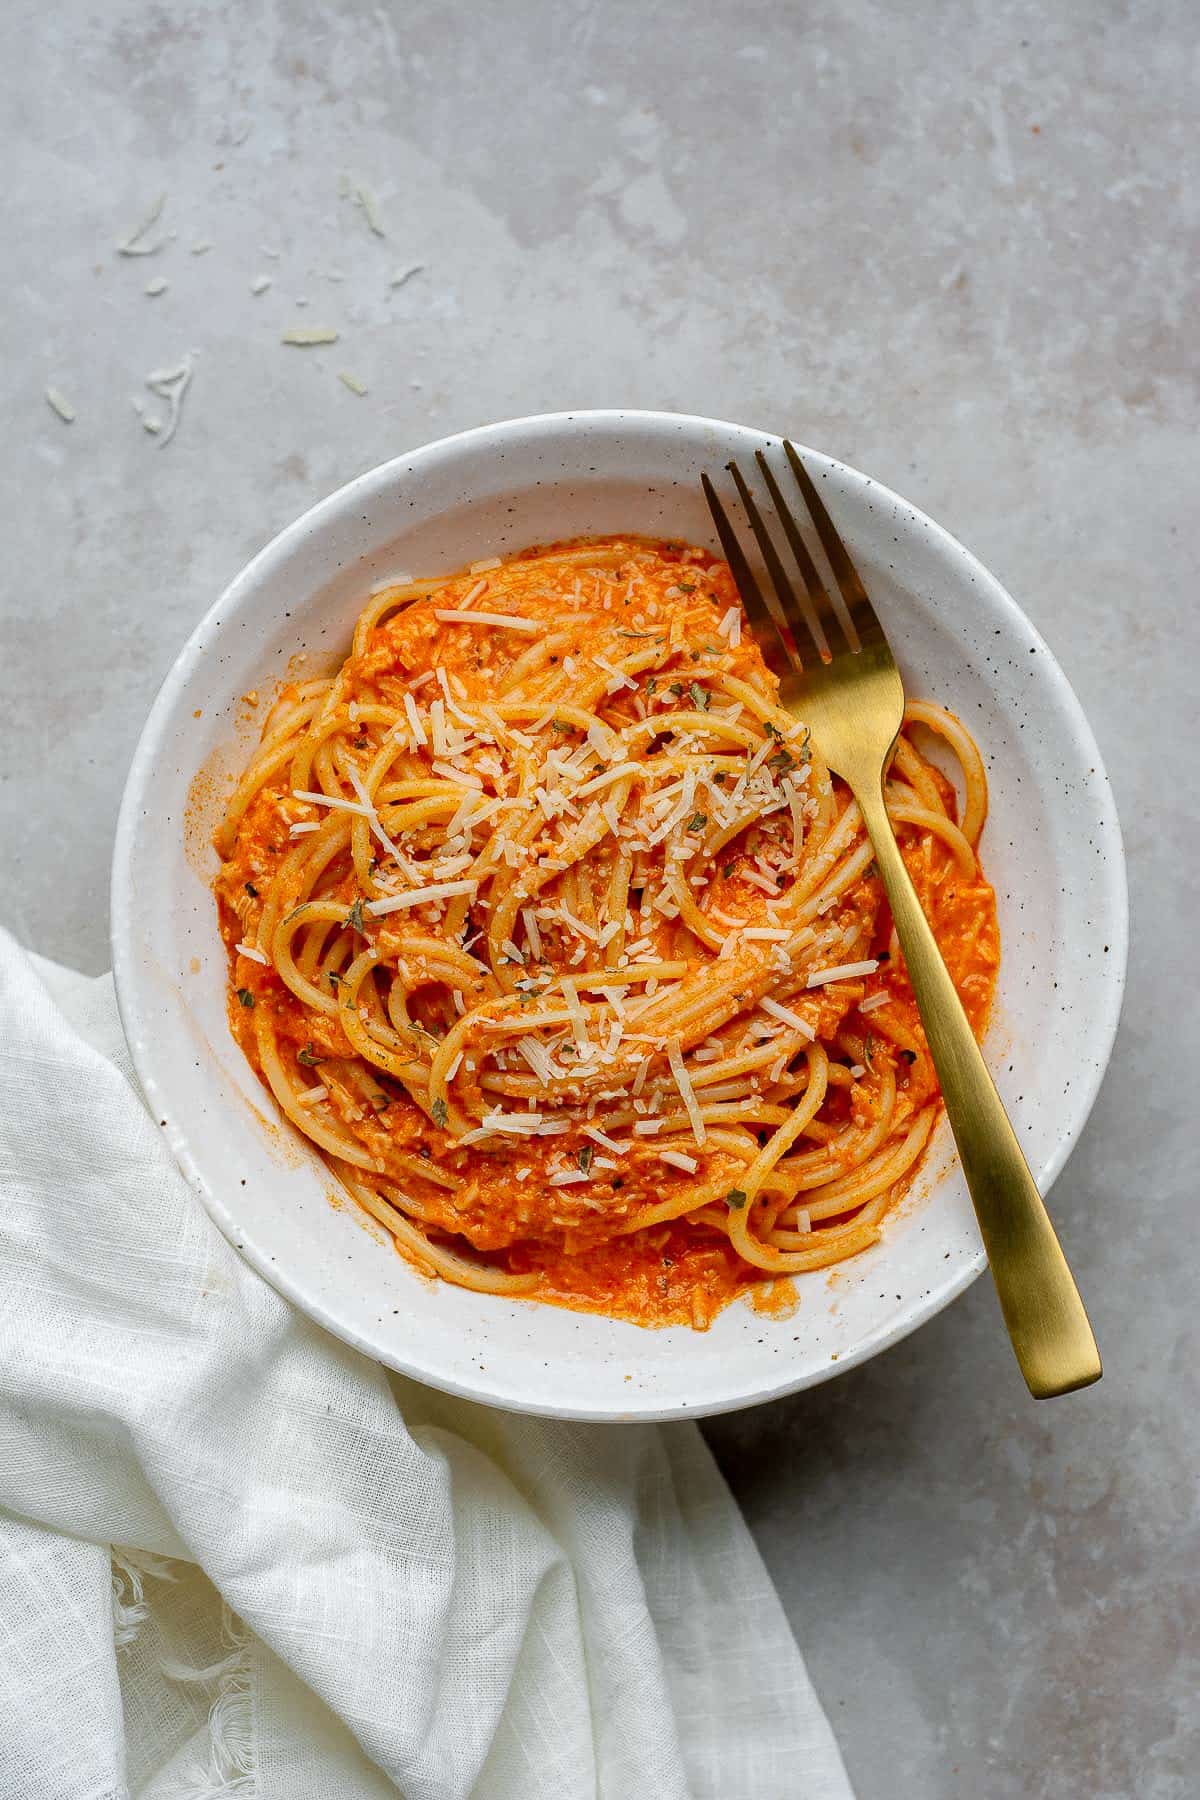 Roasted red pepper sauce over pasta with parmesan sauce.